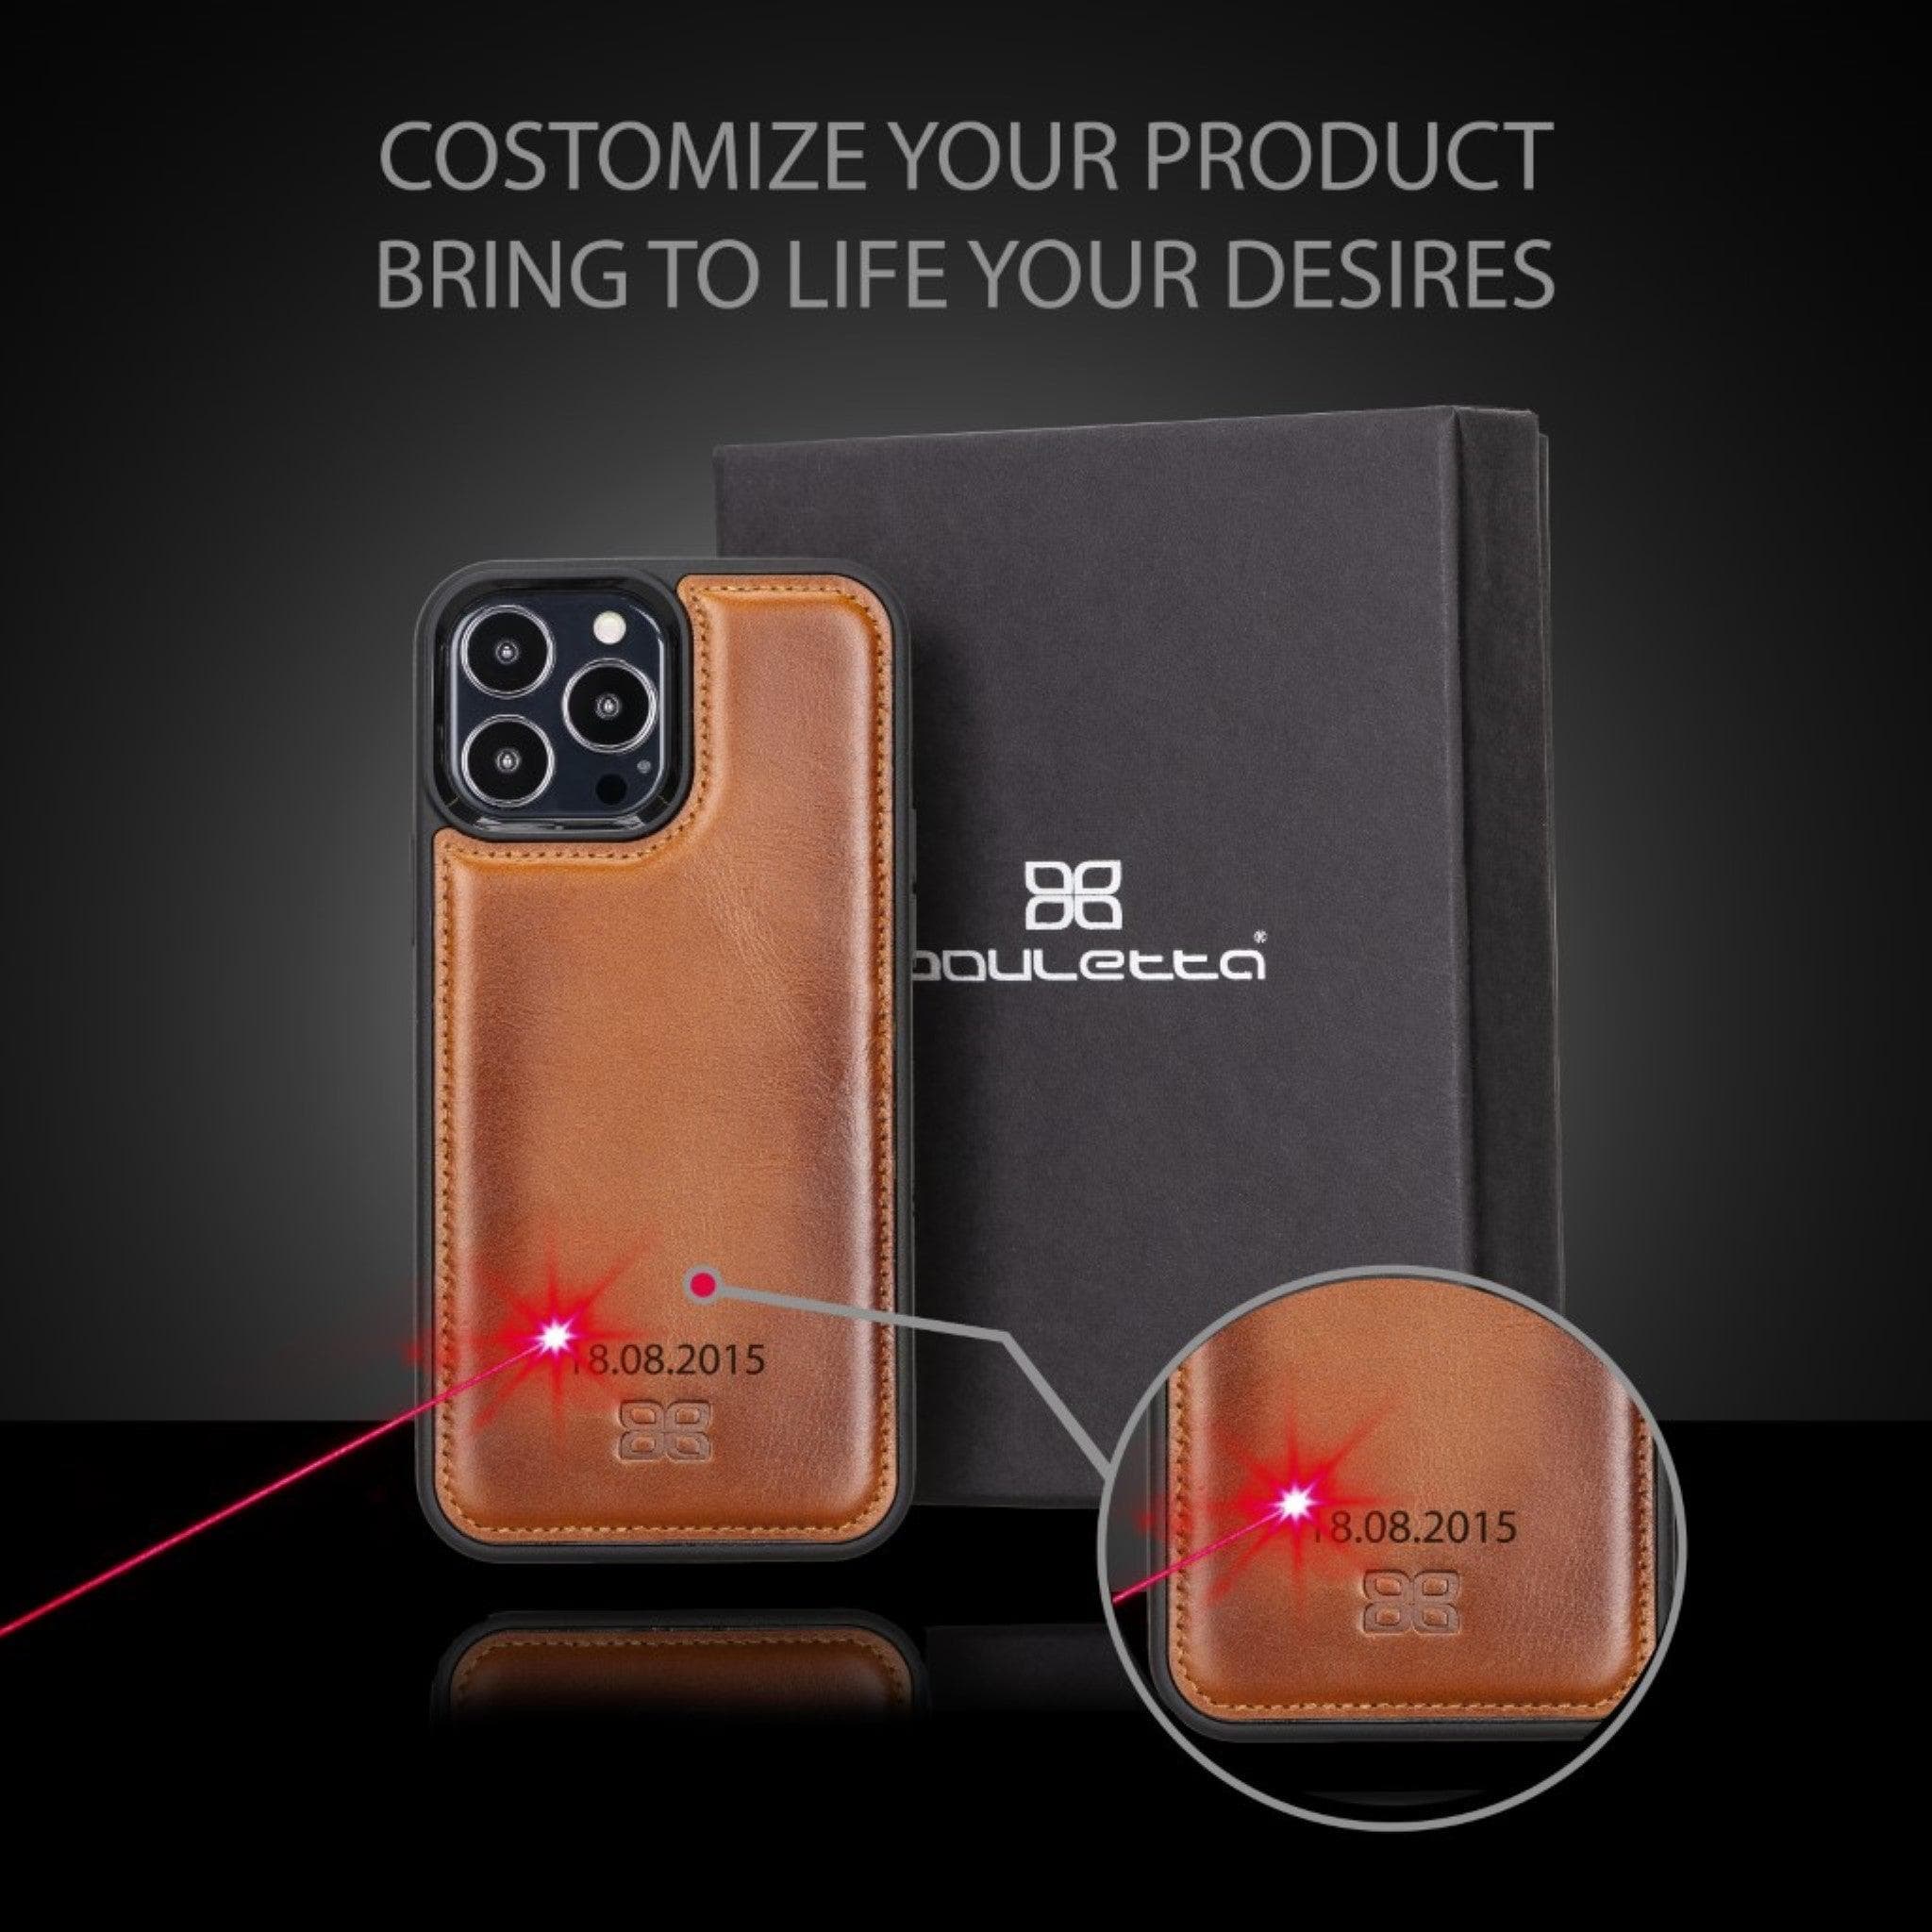 Bouletta Special Combines, Leather Back Covers, Card Holders and Keyrings Bouletta LTD